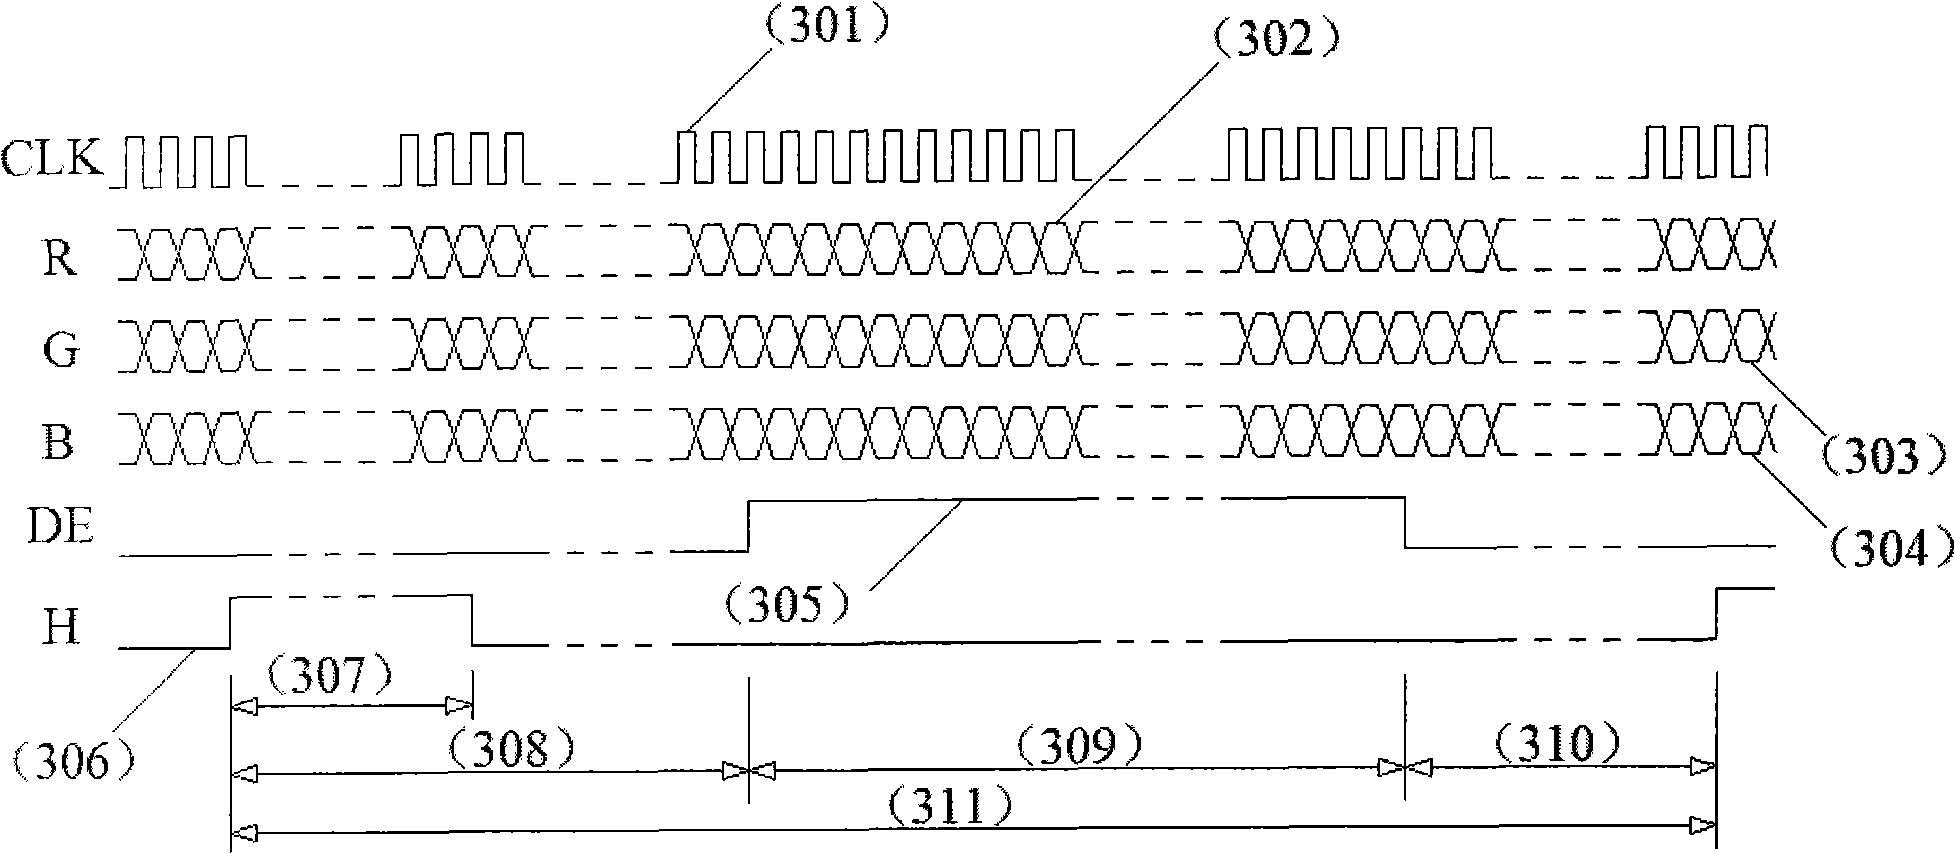 Transmission control protocol and method for sharing channel by paths of real-time multimedia streams